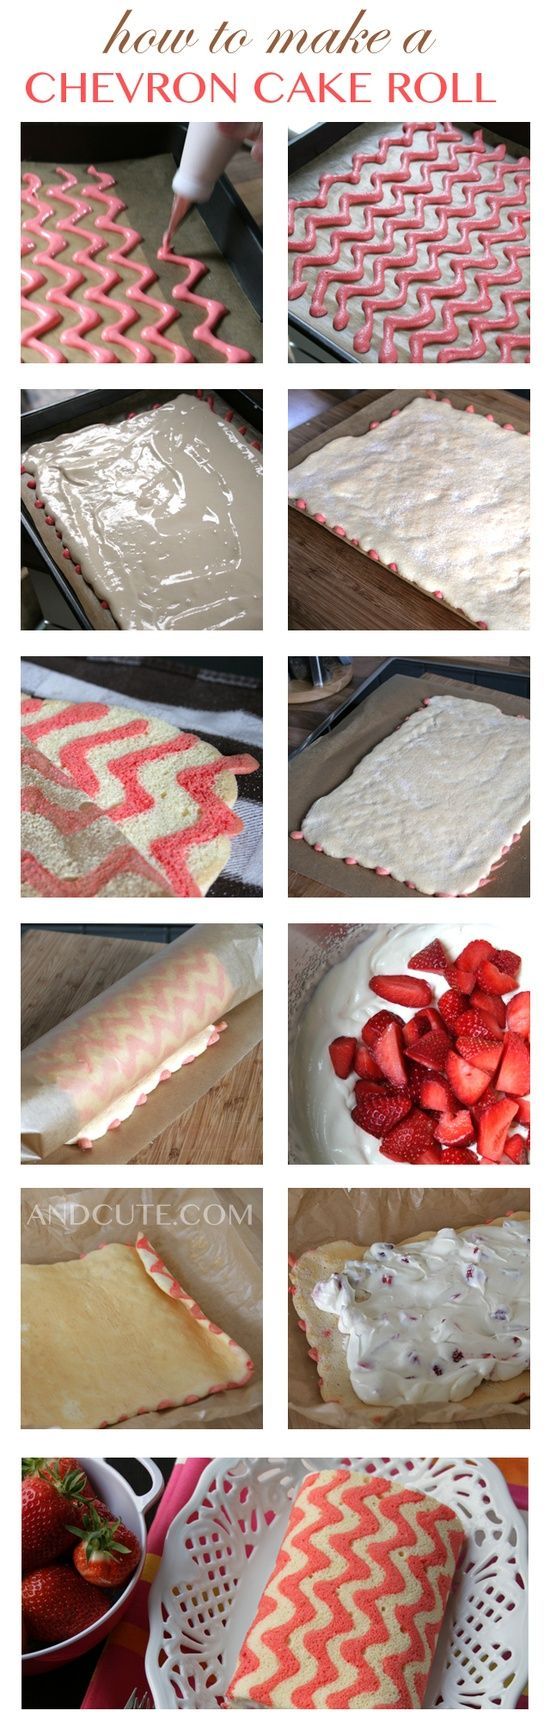 Chevron Cake Roll. How cool is this?! I want to try this with other designs!